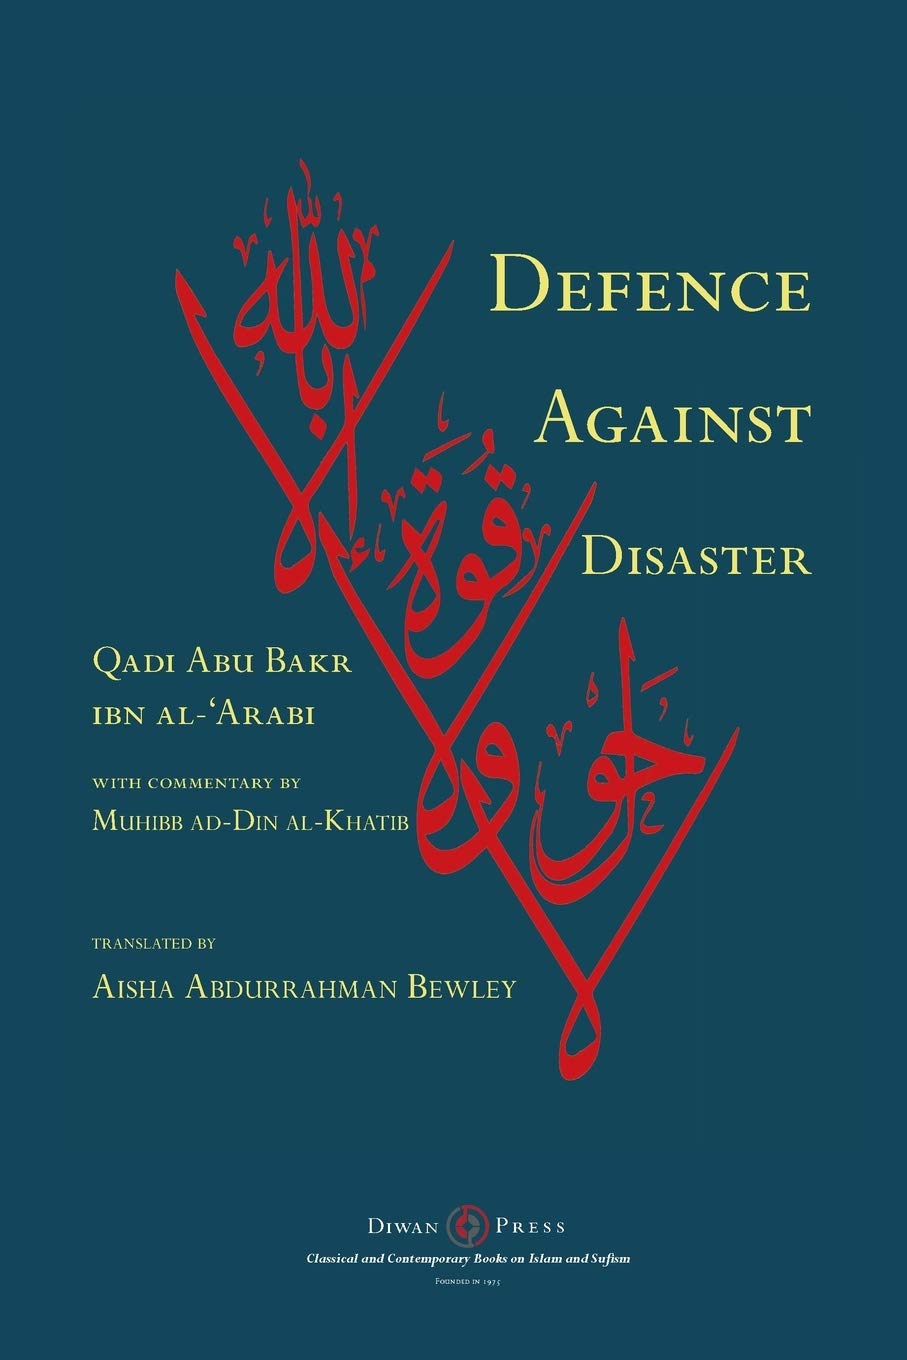 Defence Against Disaster: in Accurately Determining the Positions of the Companions after the Death of the Prophet - Abu Bakr Ibn al-'Arabi (Author), Muhibb ad-Din Al-Khatib (Commentary), Aisha Abdurrahman Bewley (Translator)